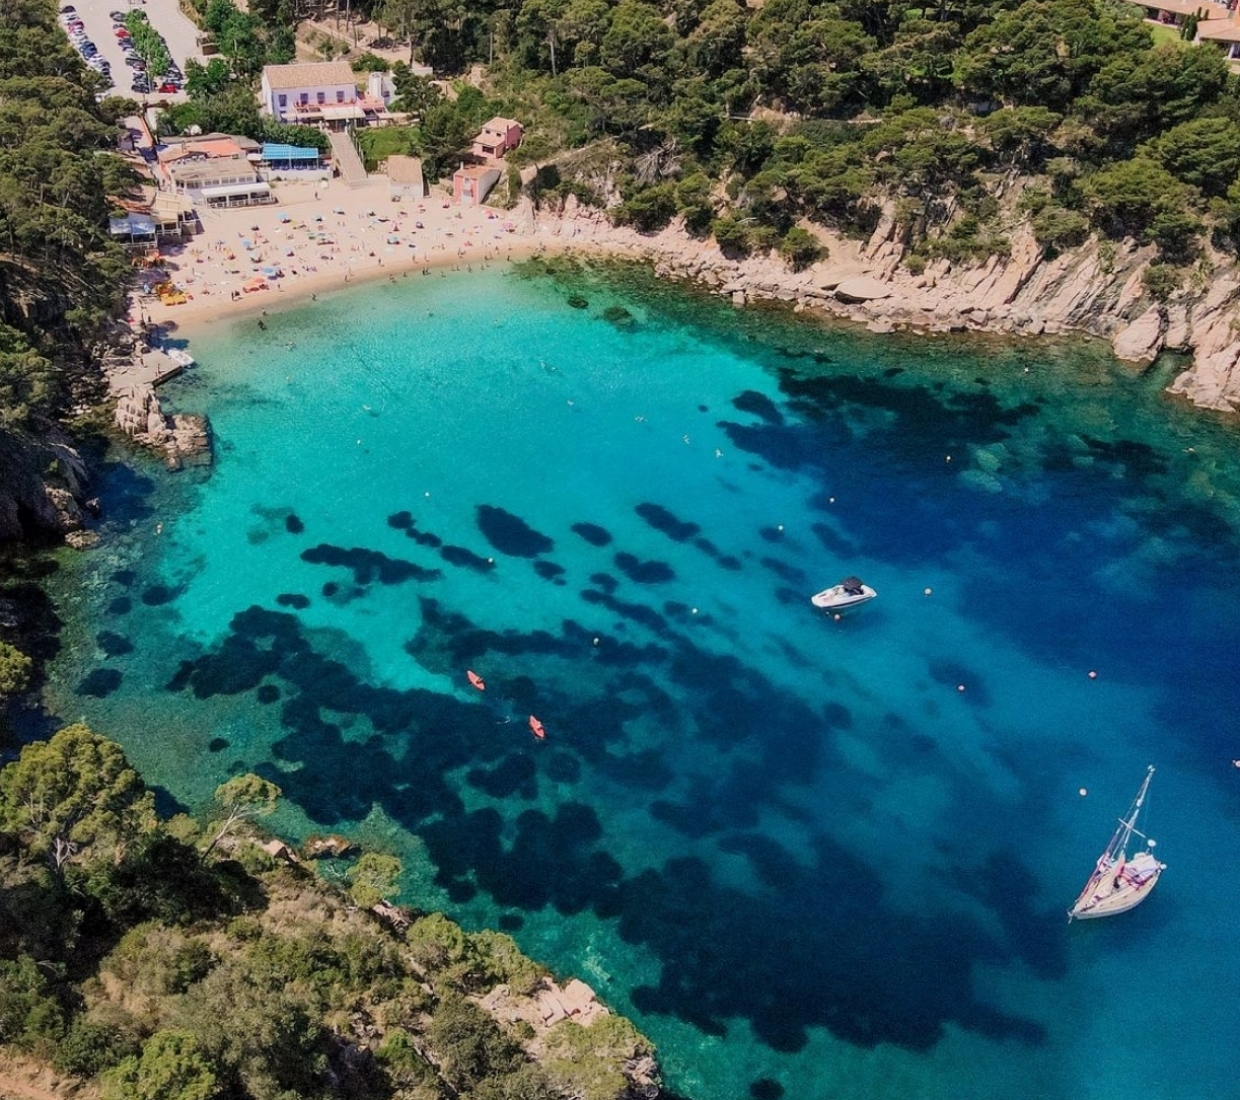 Handpicked boutique hotels in the Costa Brava, B&Bs and holiday homes